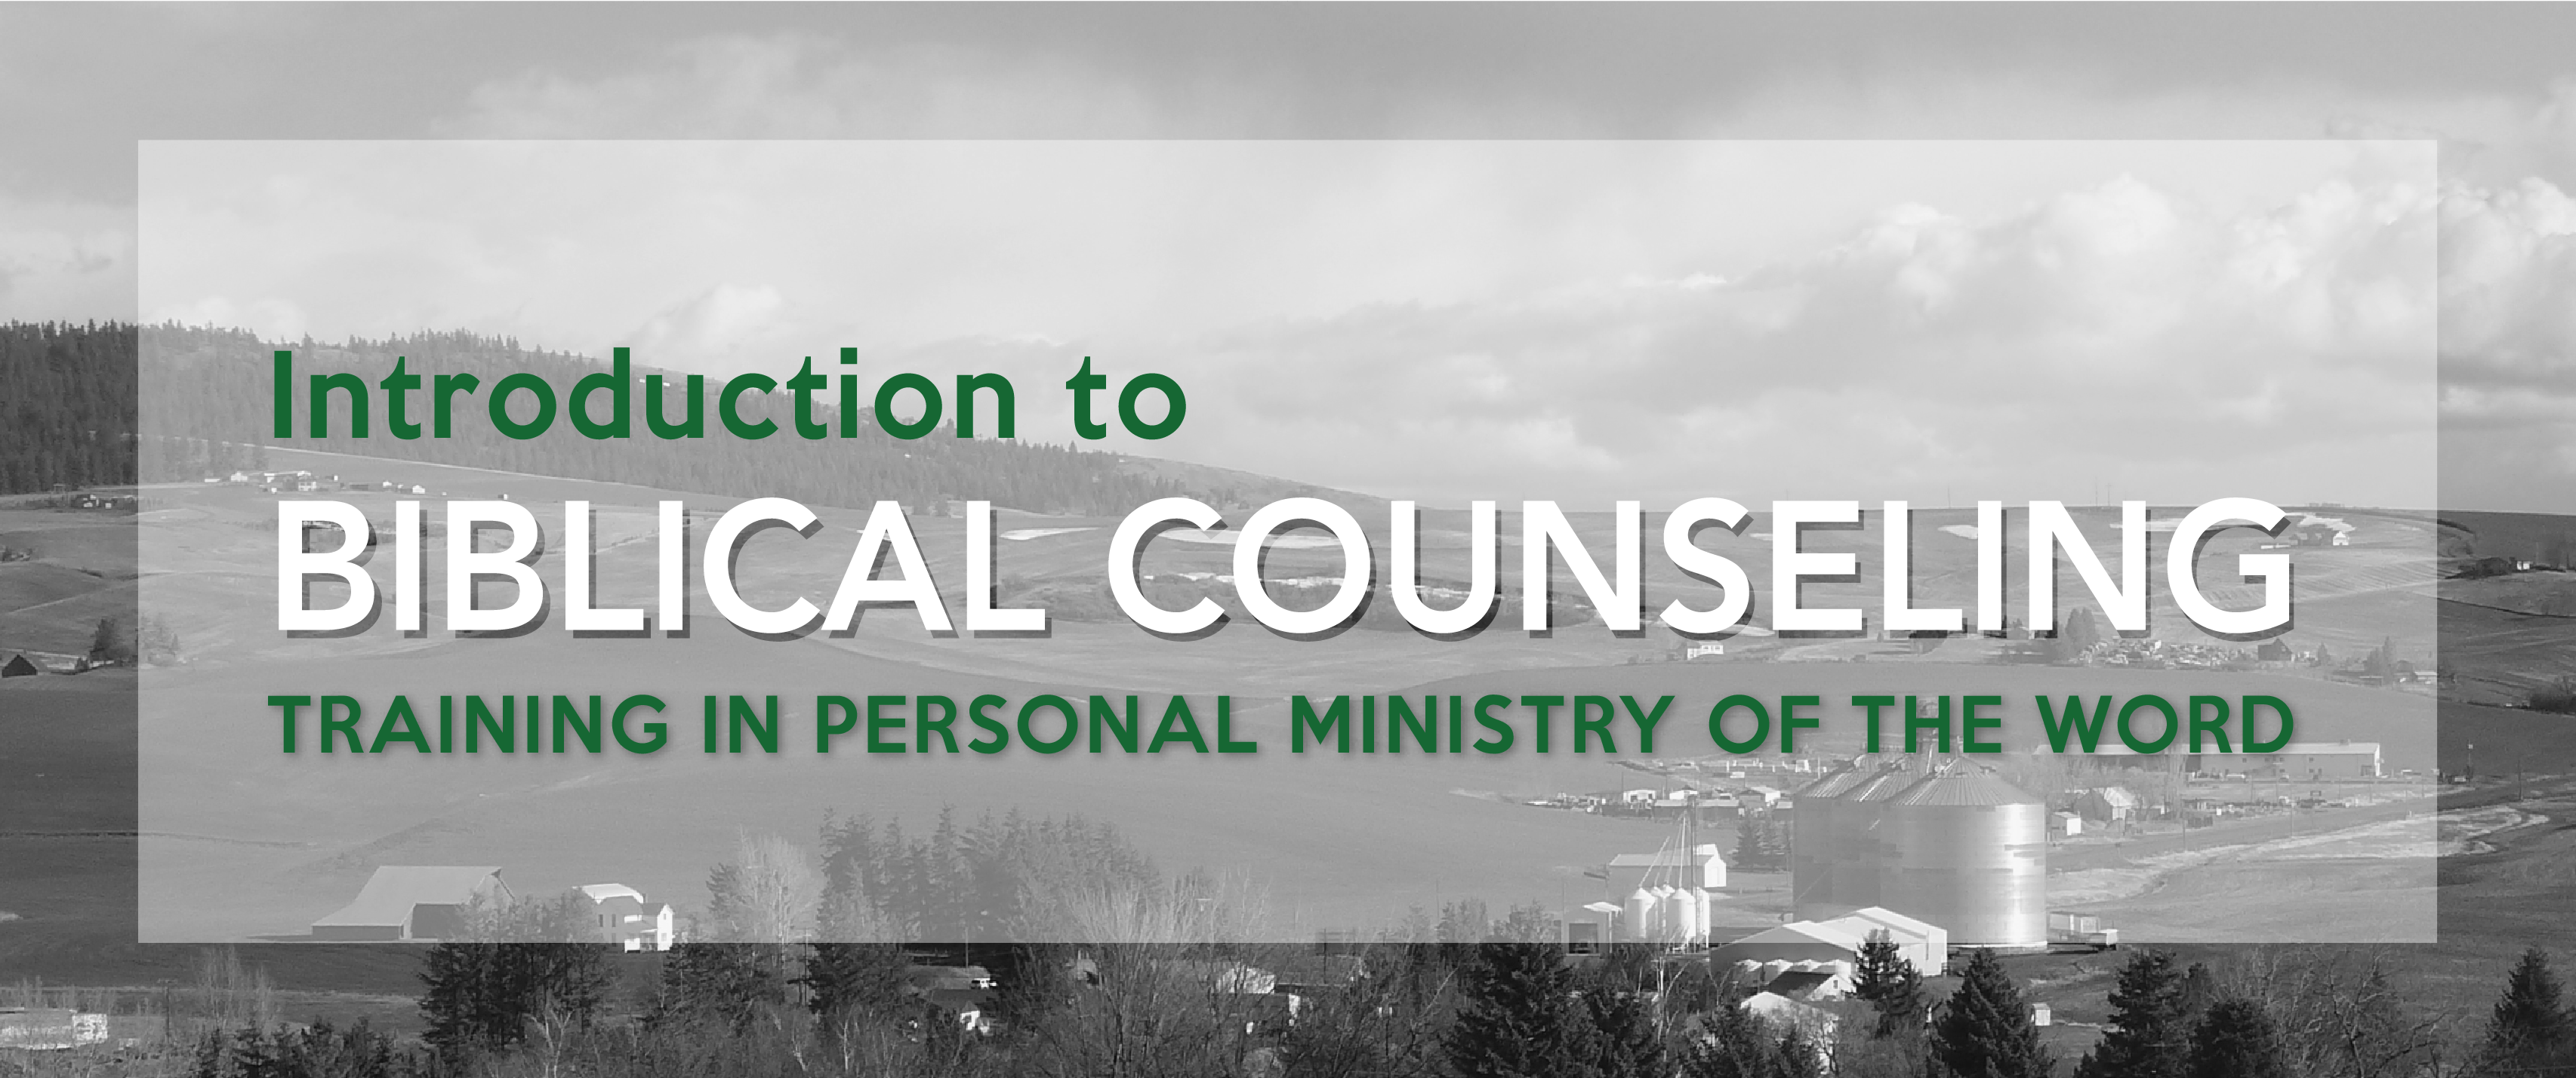 Introduction to biblical counseling christ church events 2016